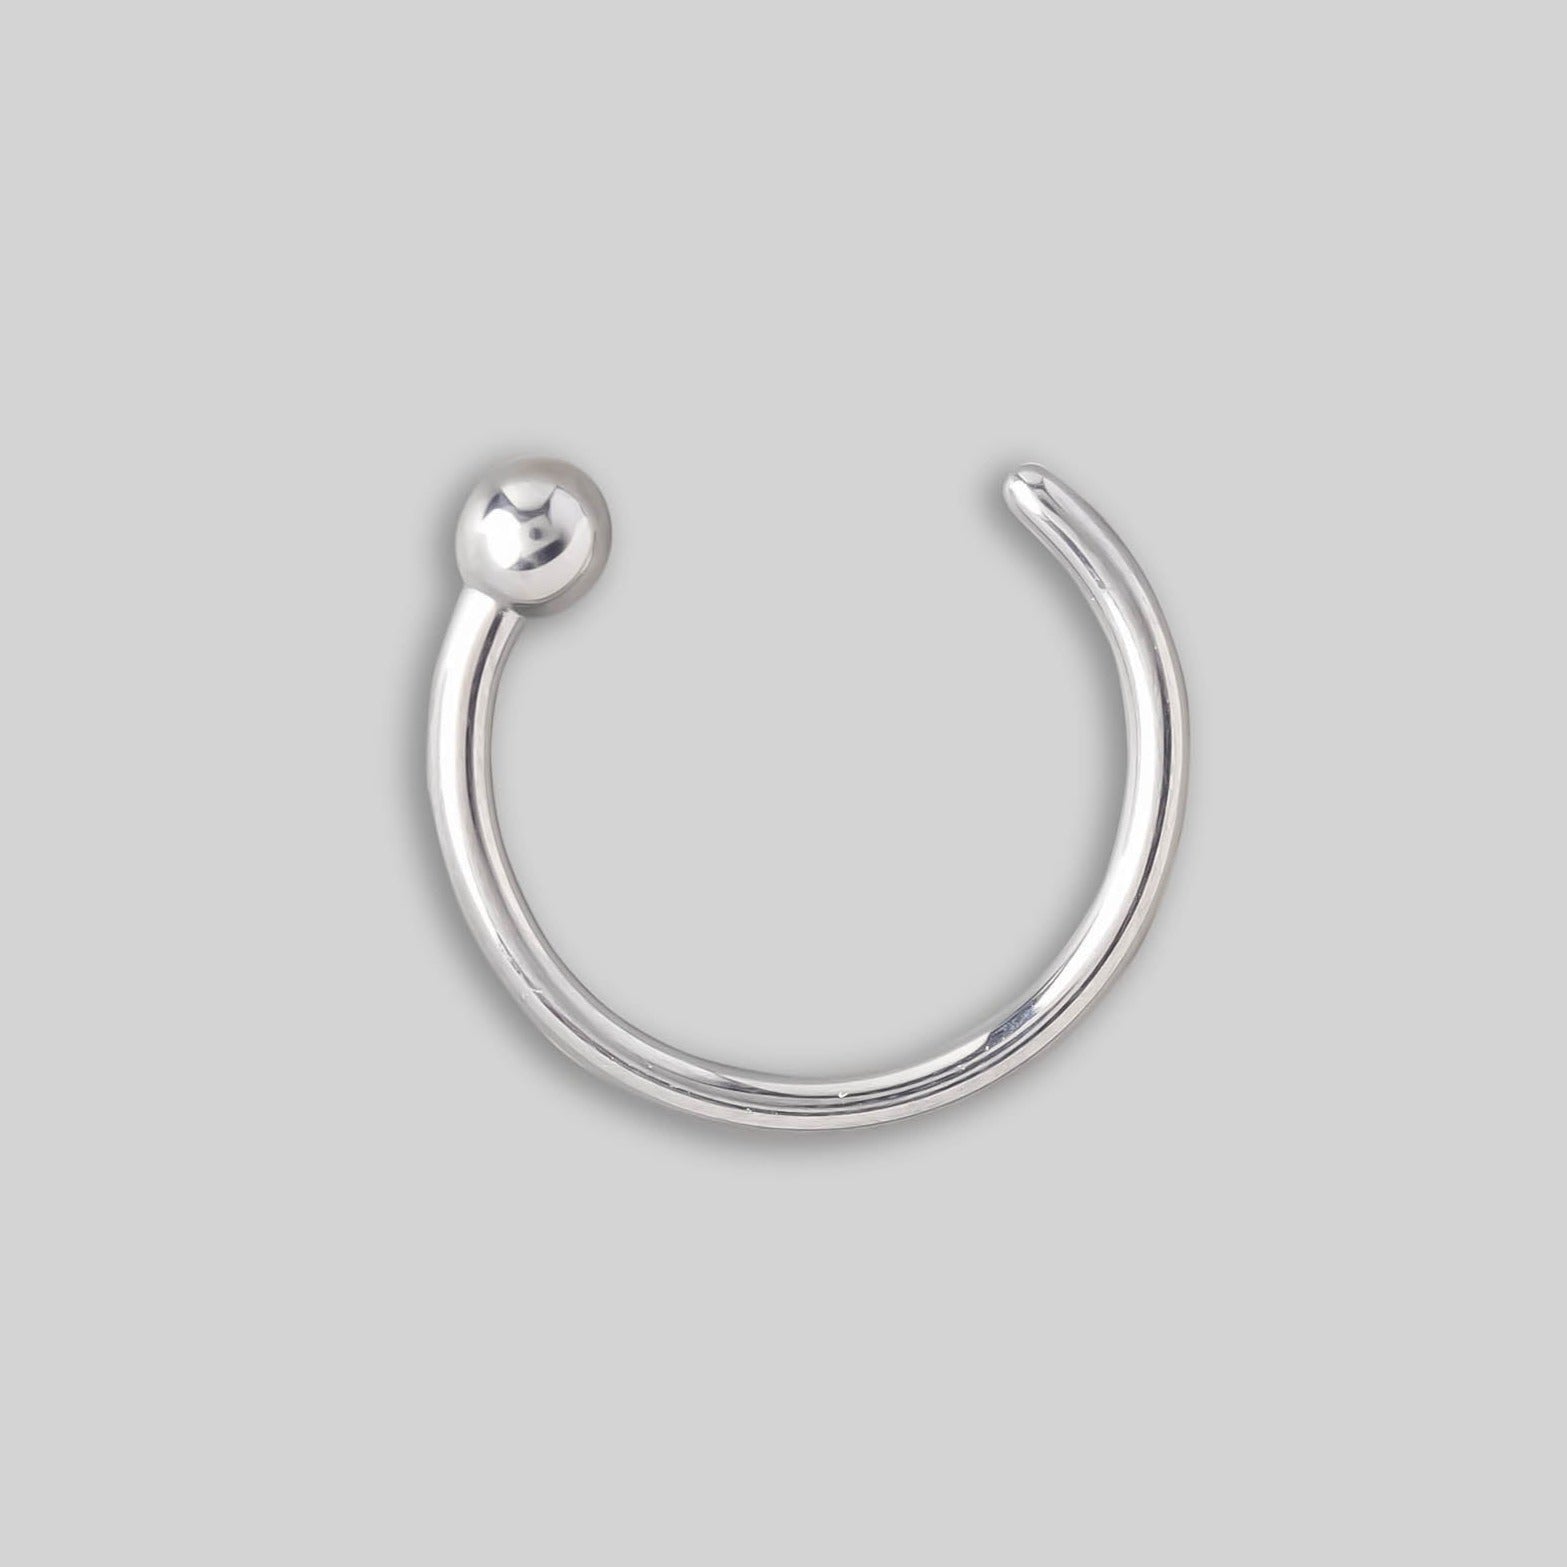 Ball End Nose Ring Hoop in Silver - Titanium - Camden Body Jewellery